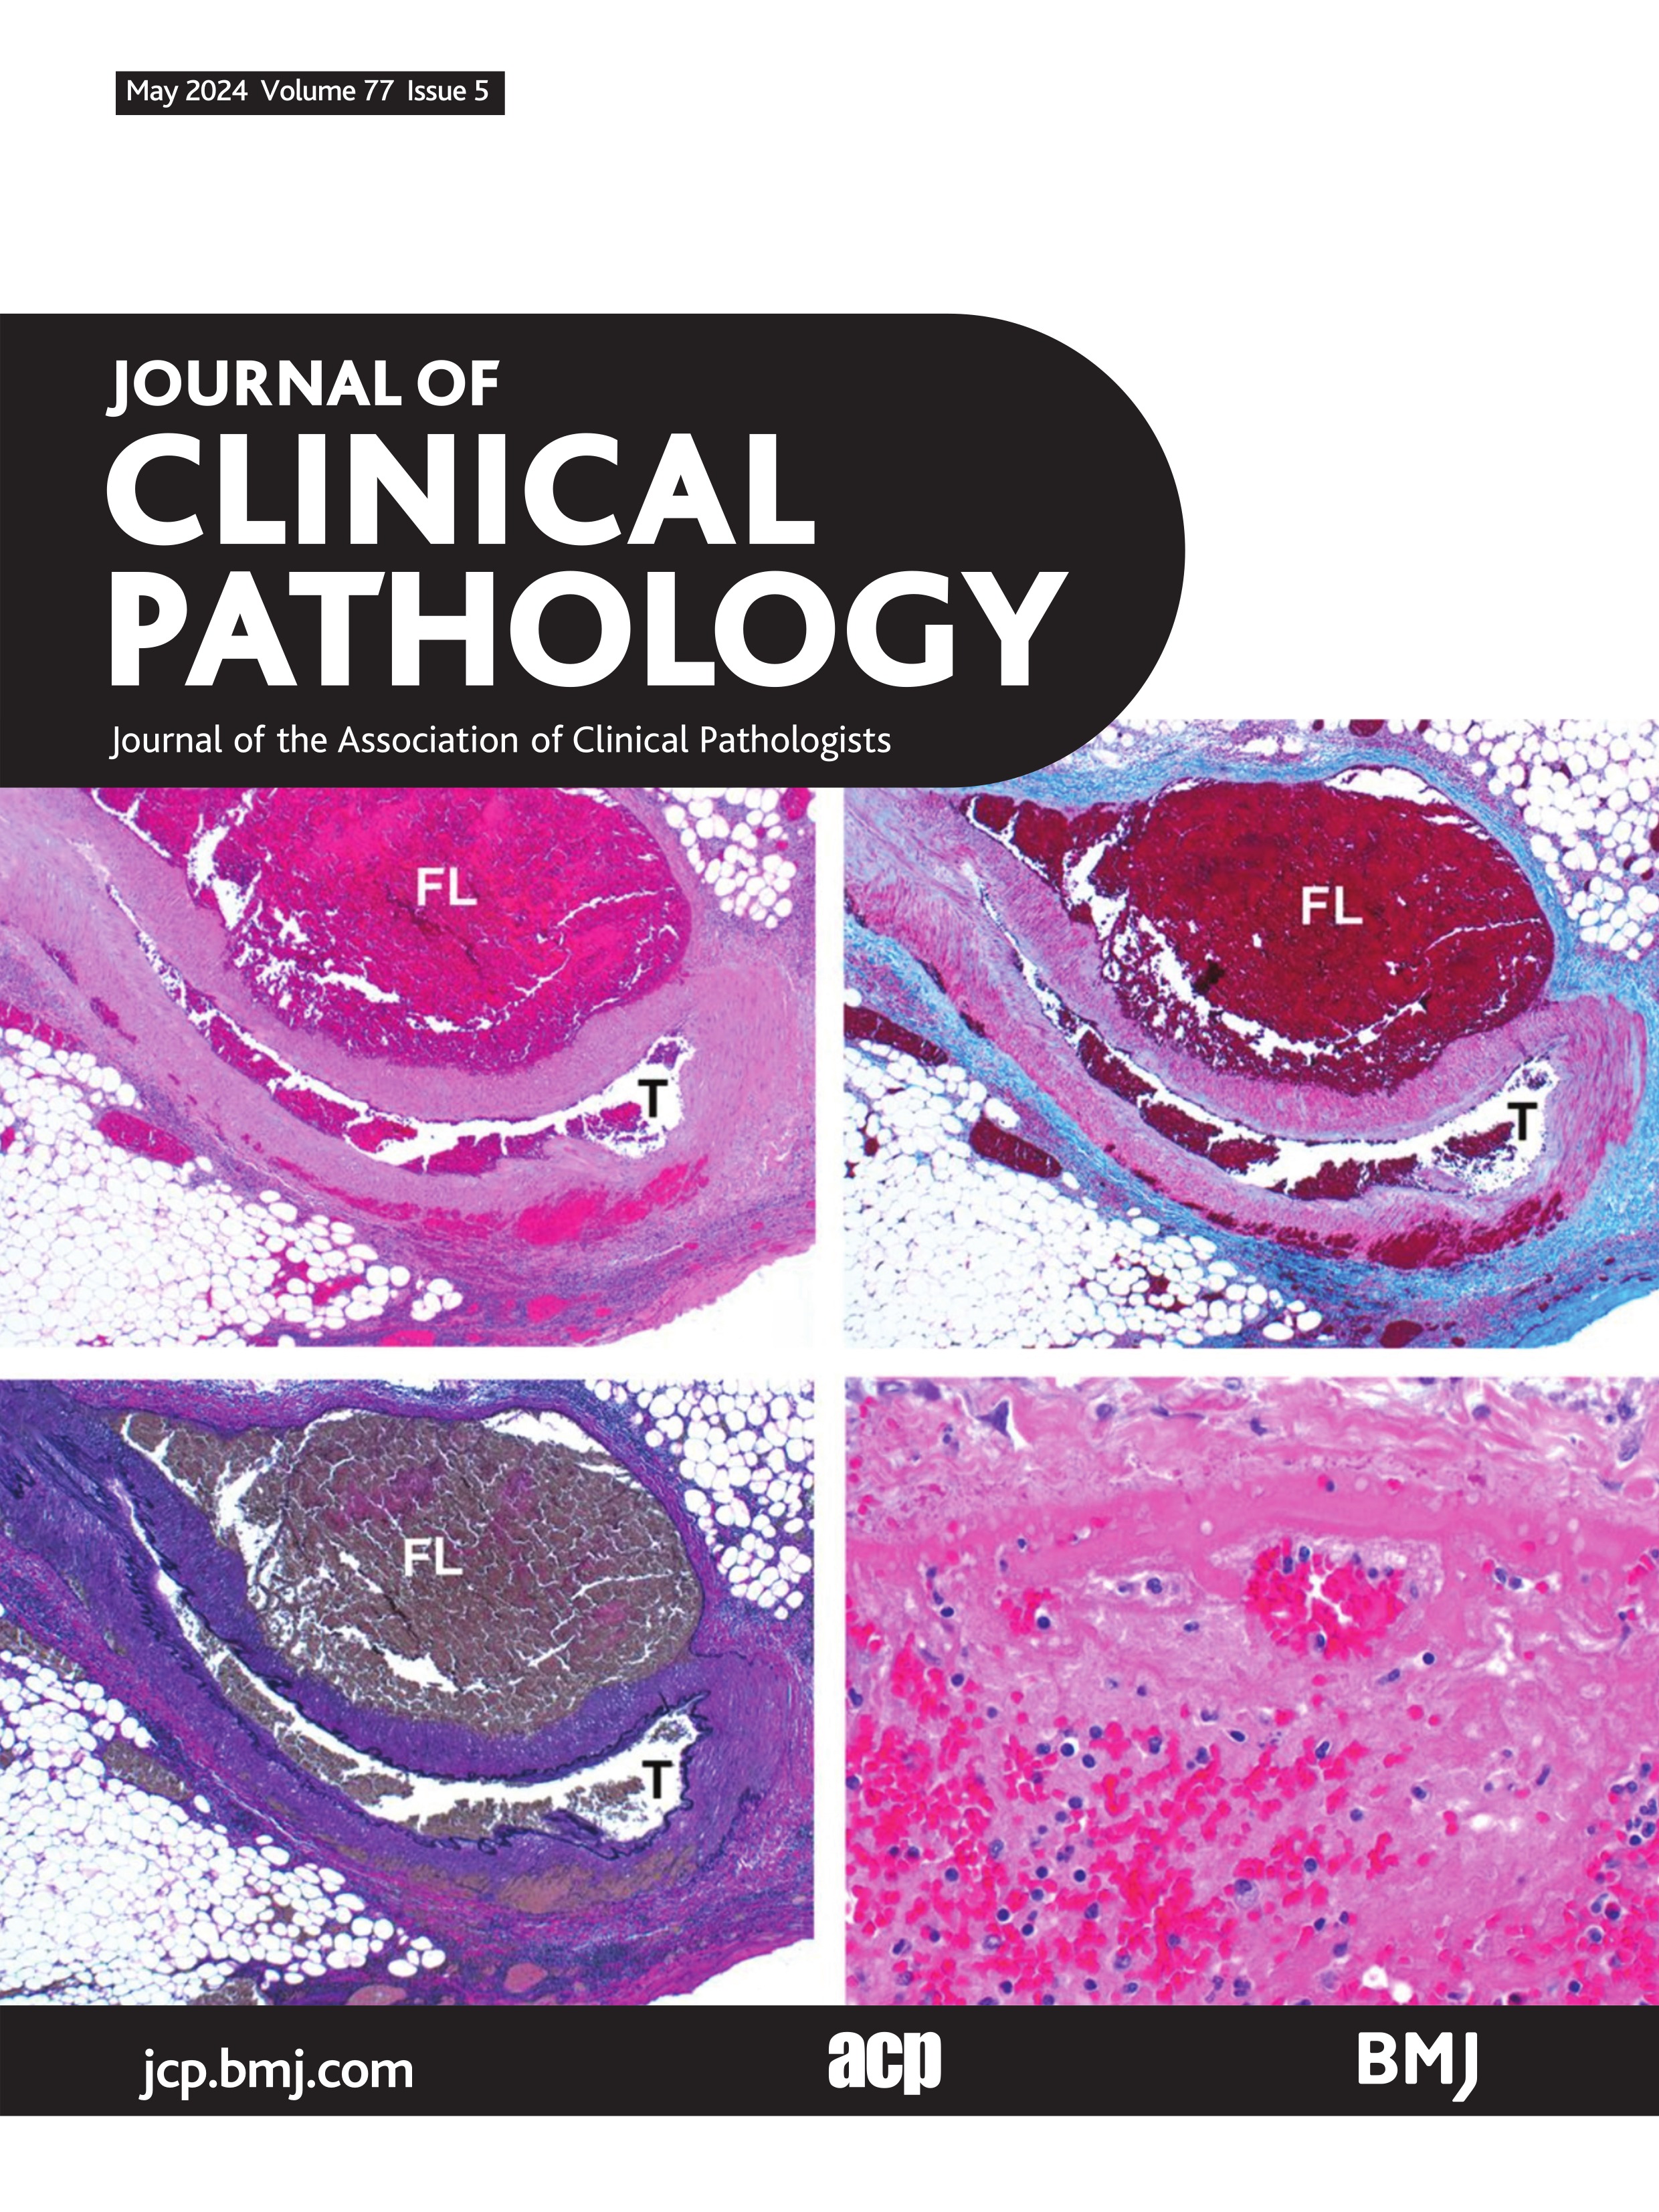 Primary salivary duct carcinoma of the lung: clinicopathological features, diagnosis and practical challenges